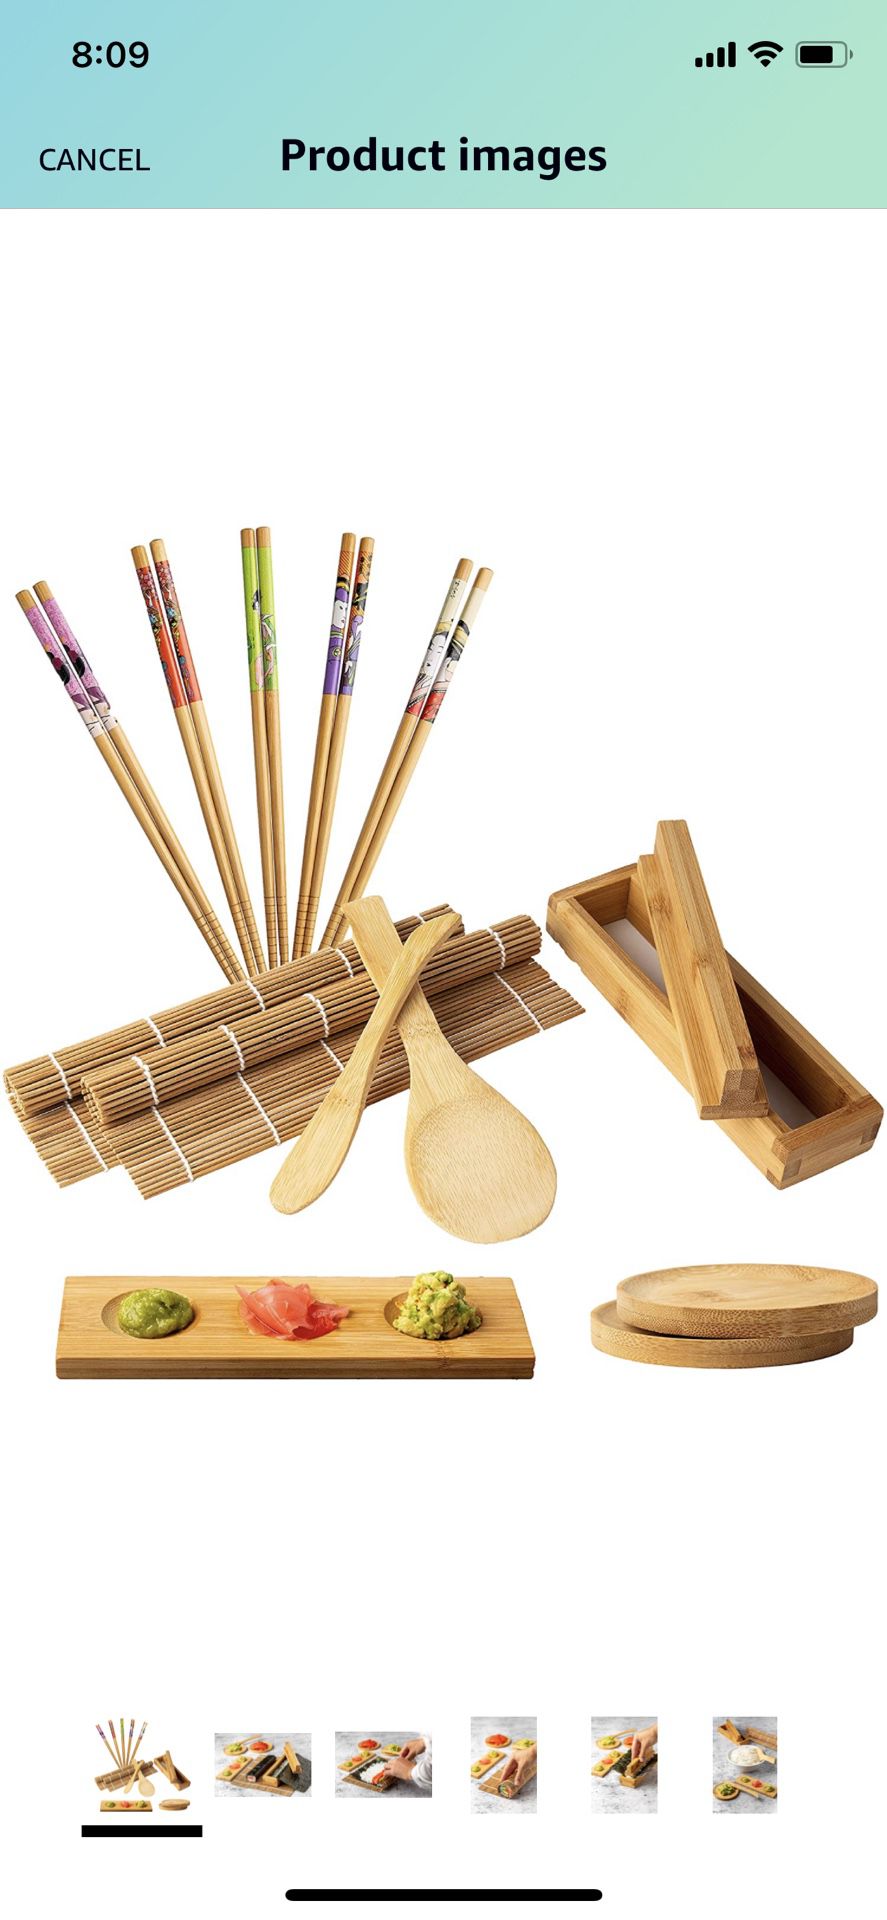 Bamboo Sushi Making Kit w/Sushi Rolling Mat, Maki Mold, 2 Sauce Dishes, 5 Chopsticks & Spreader Paddle Brand New Coral Springs 33071